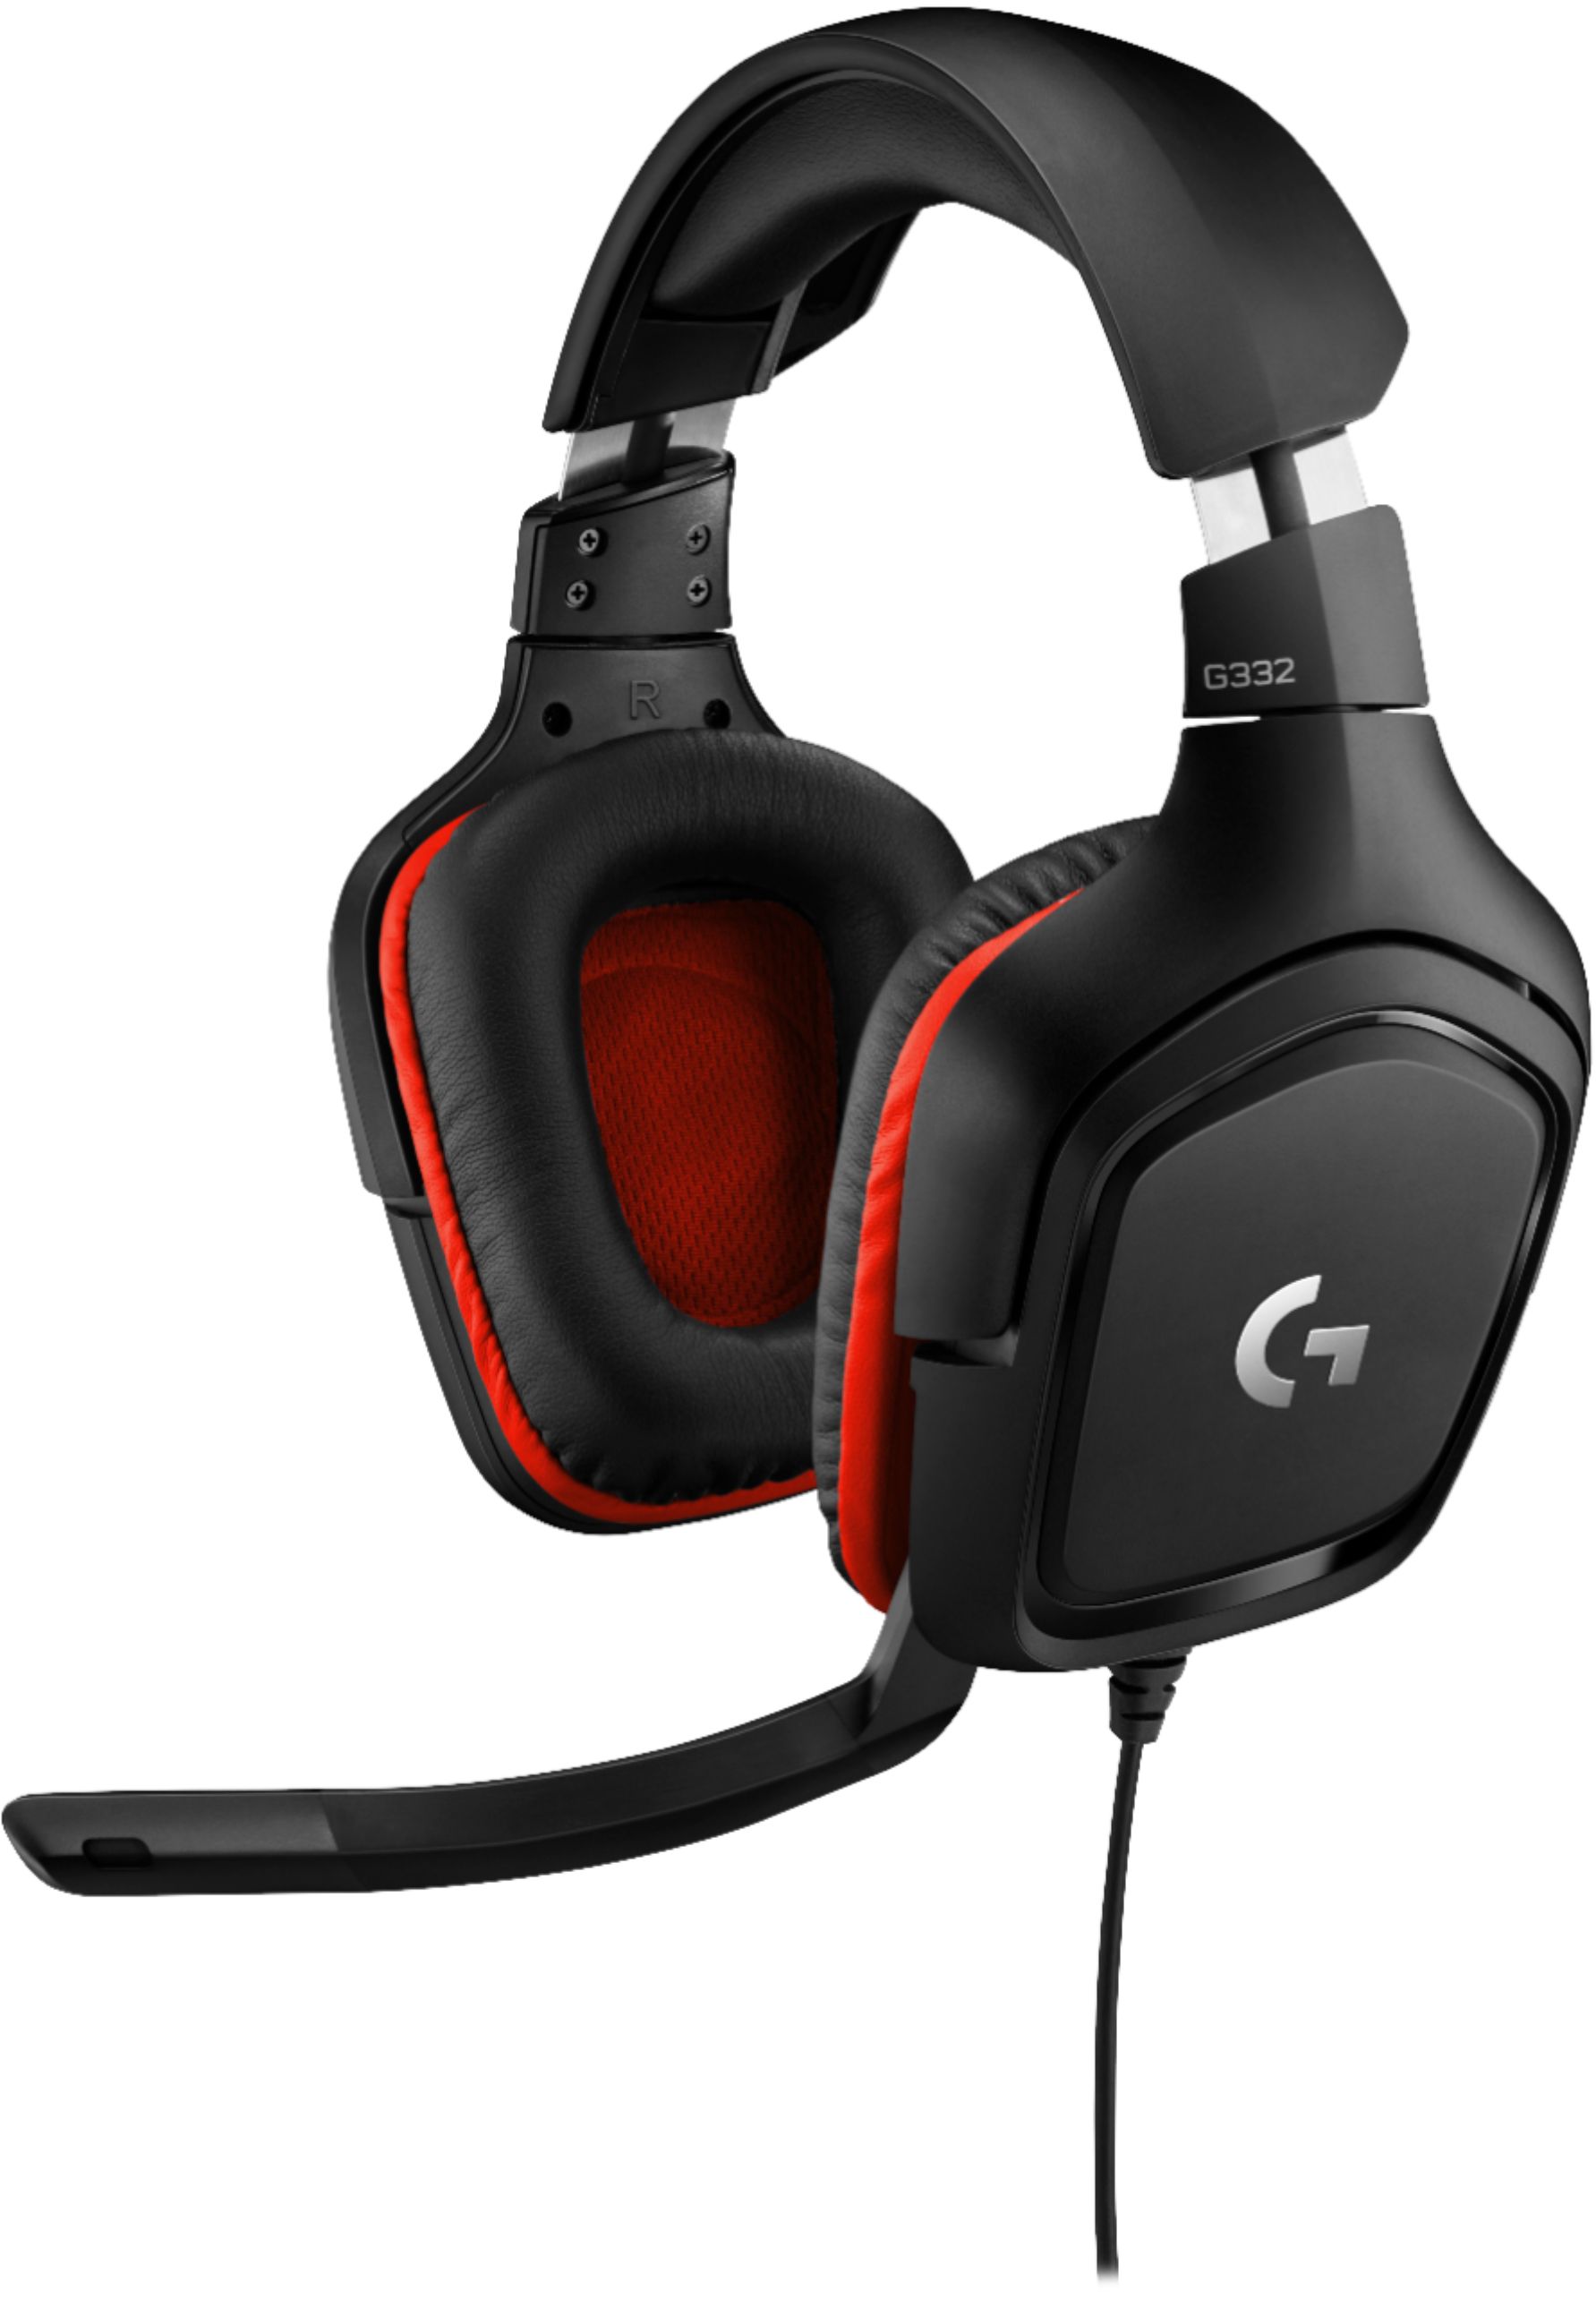 Angle View: Logitech - G PRO X Wired Gaming Headset for PC - Black